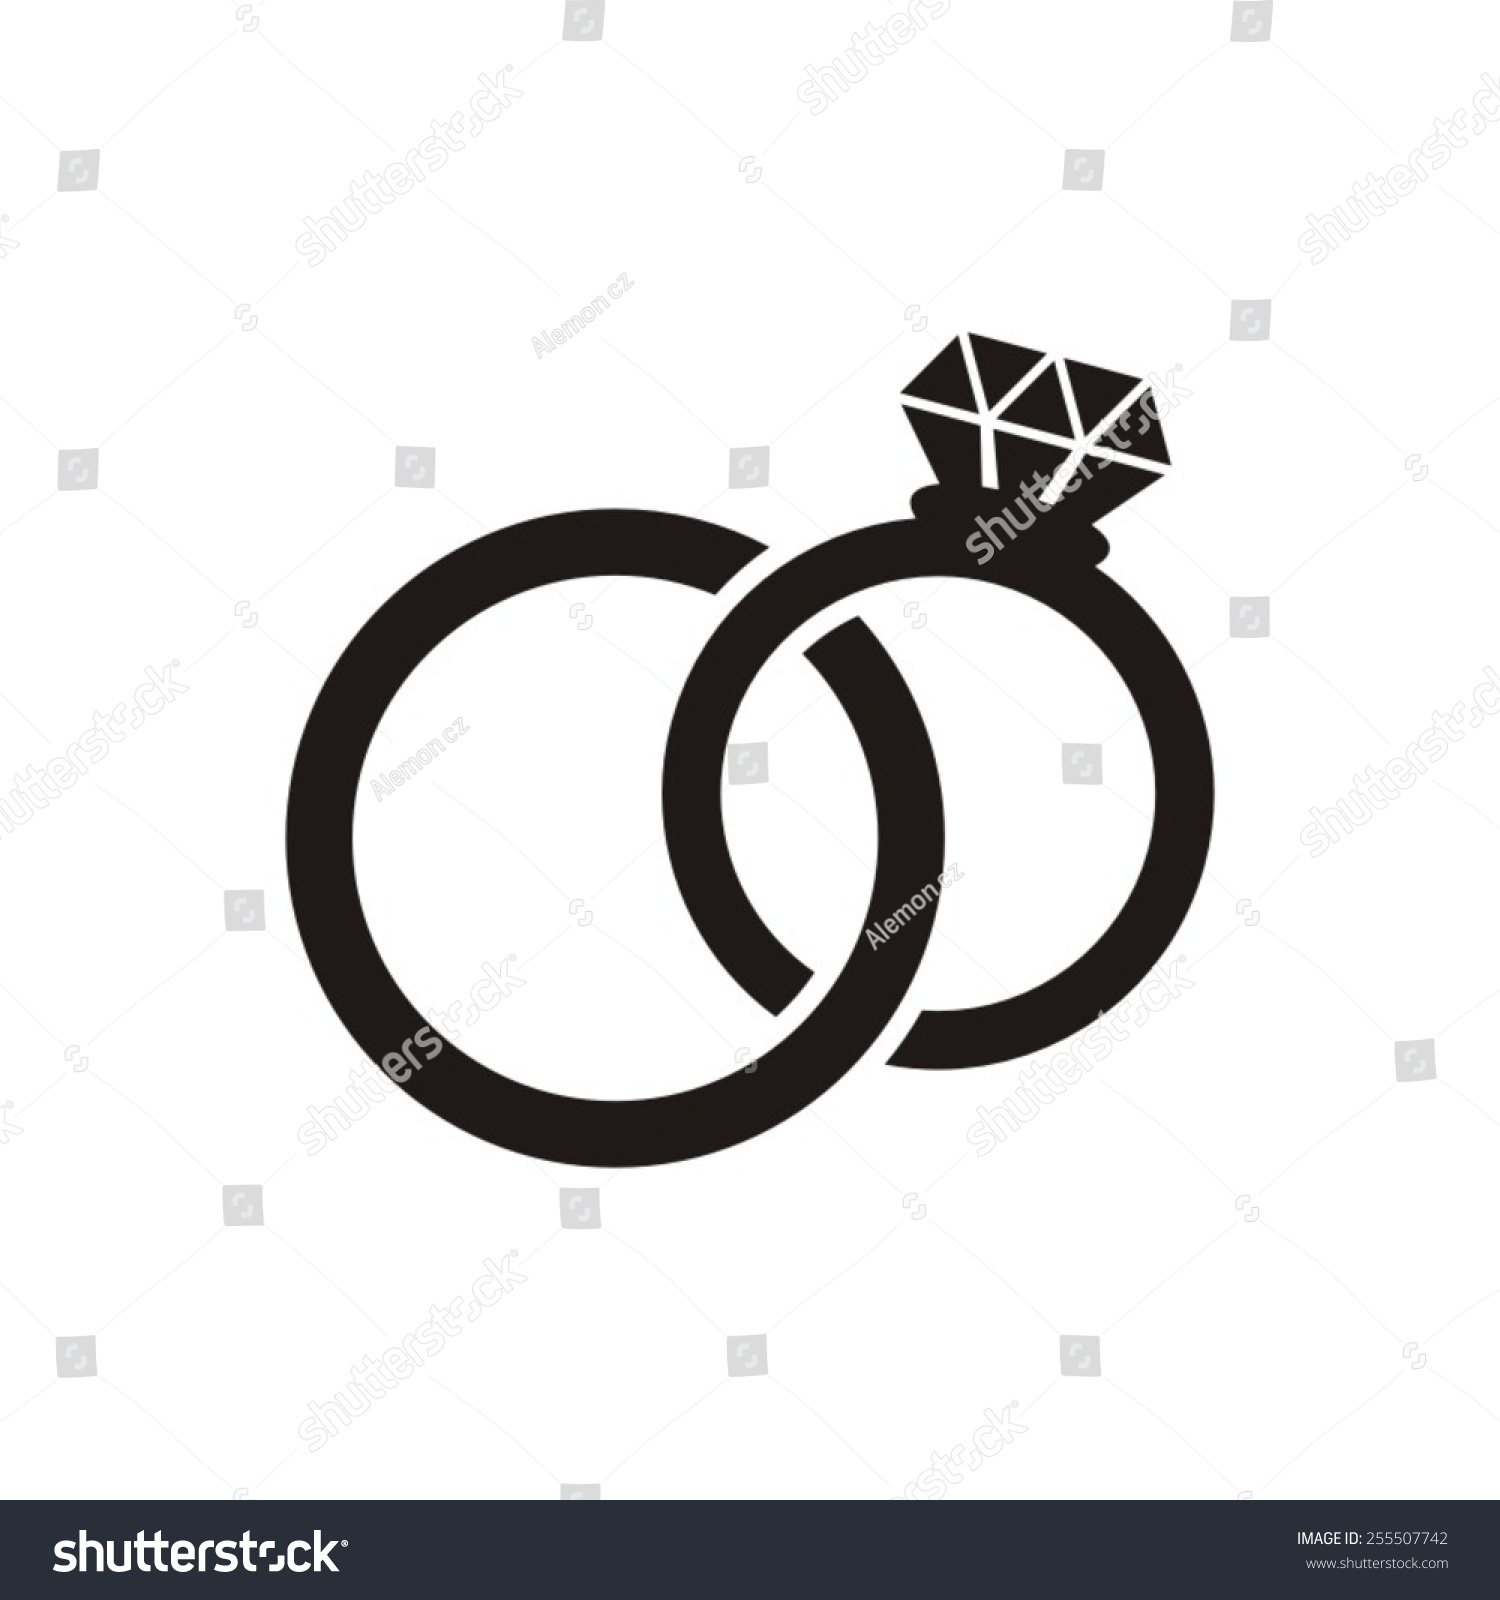 3,391 Two rings joined Images, Stock Photos & Vectors | Shutterstock